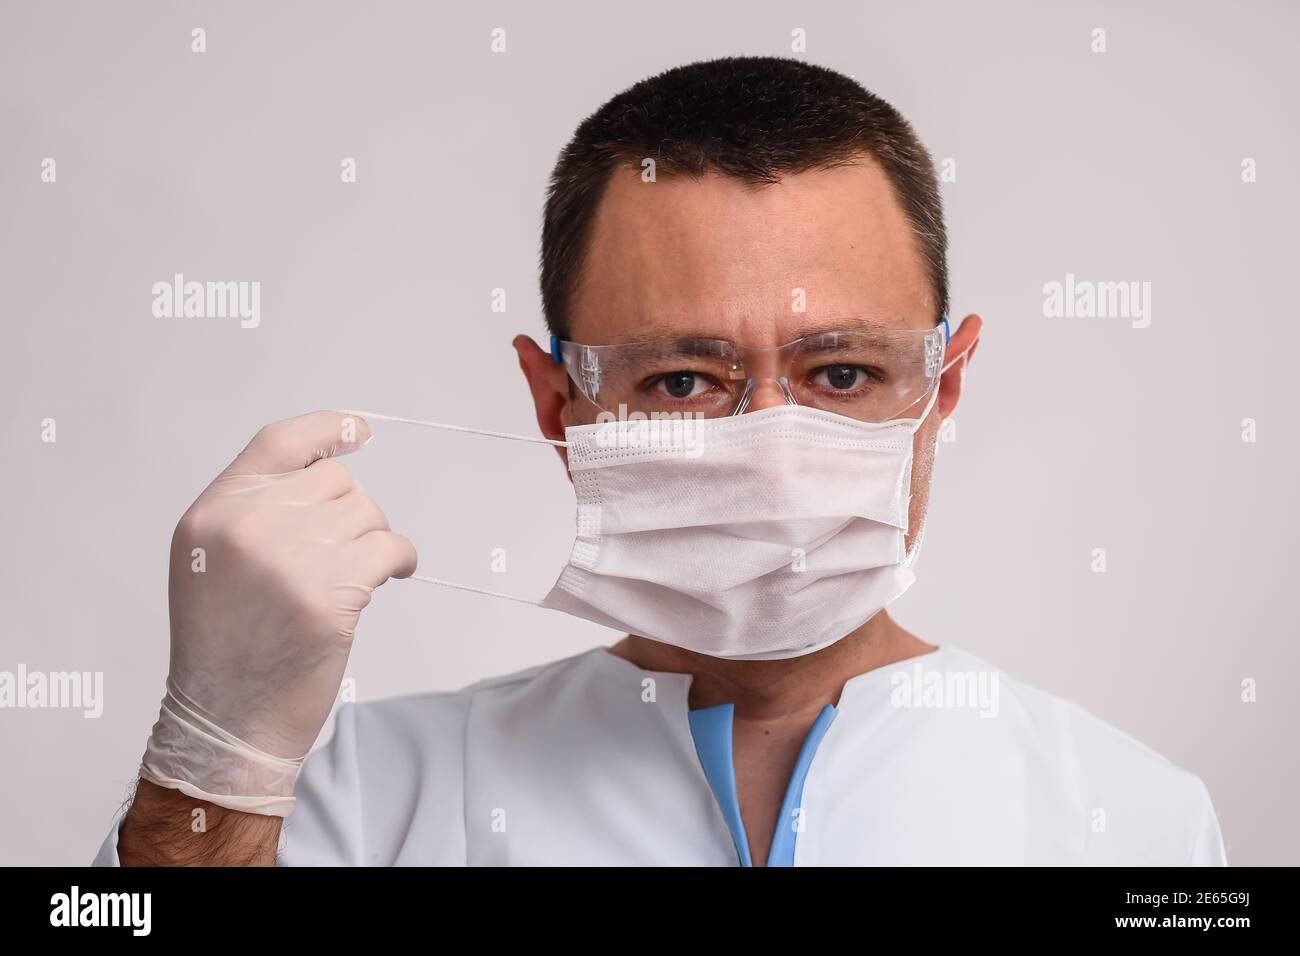 Professional doctor putting on protective face mask. COVID-19 preventive measures.  Stock Photo